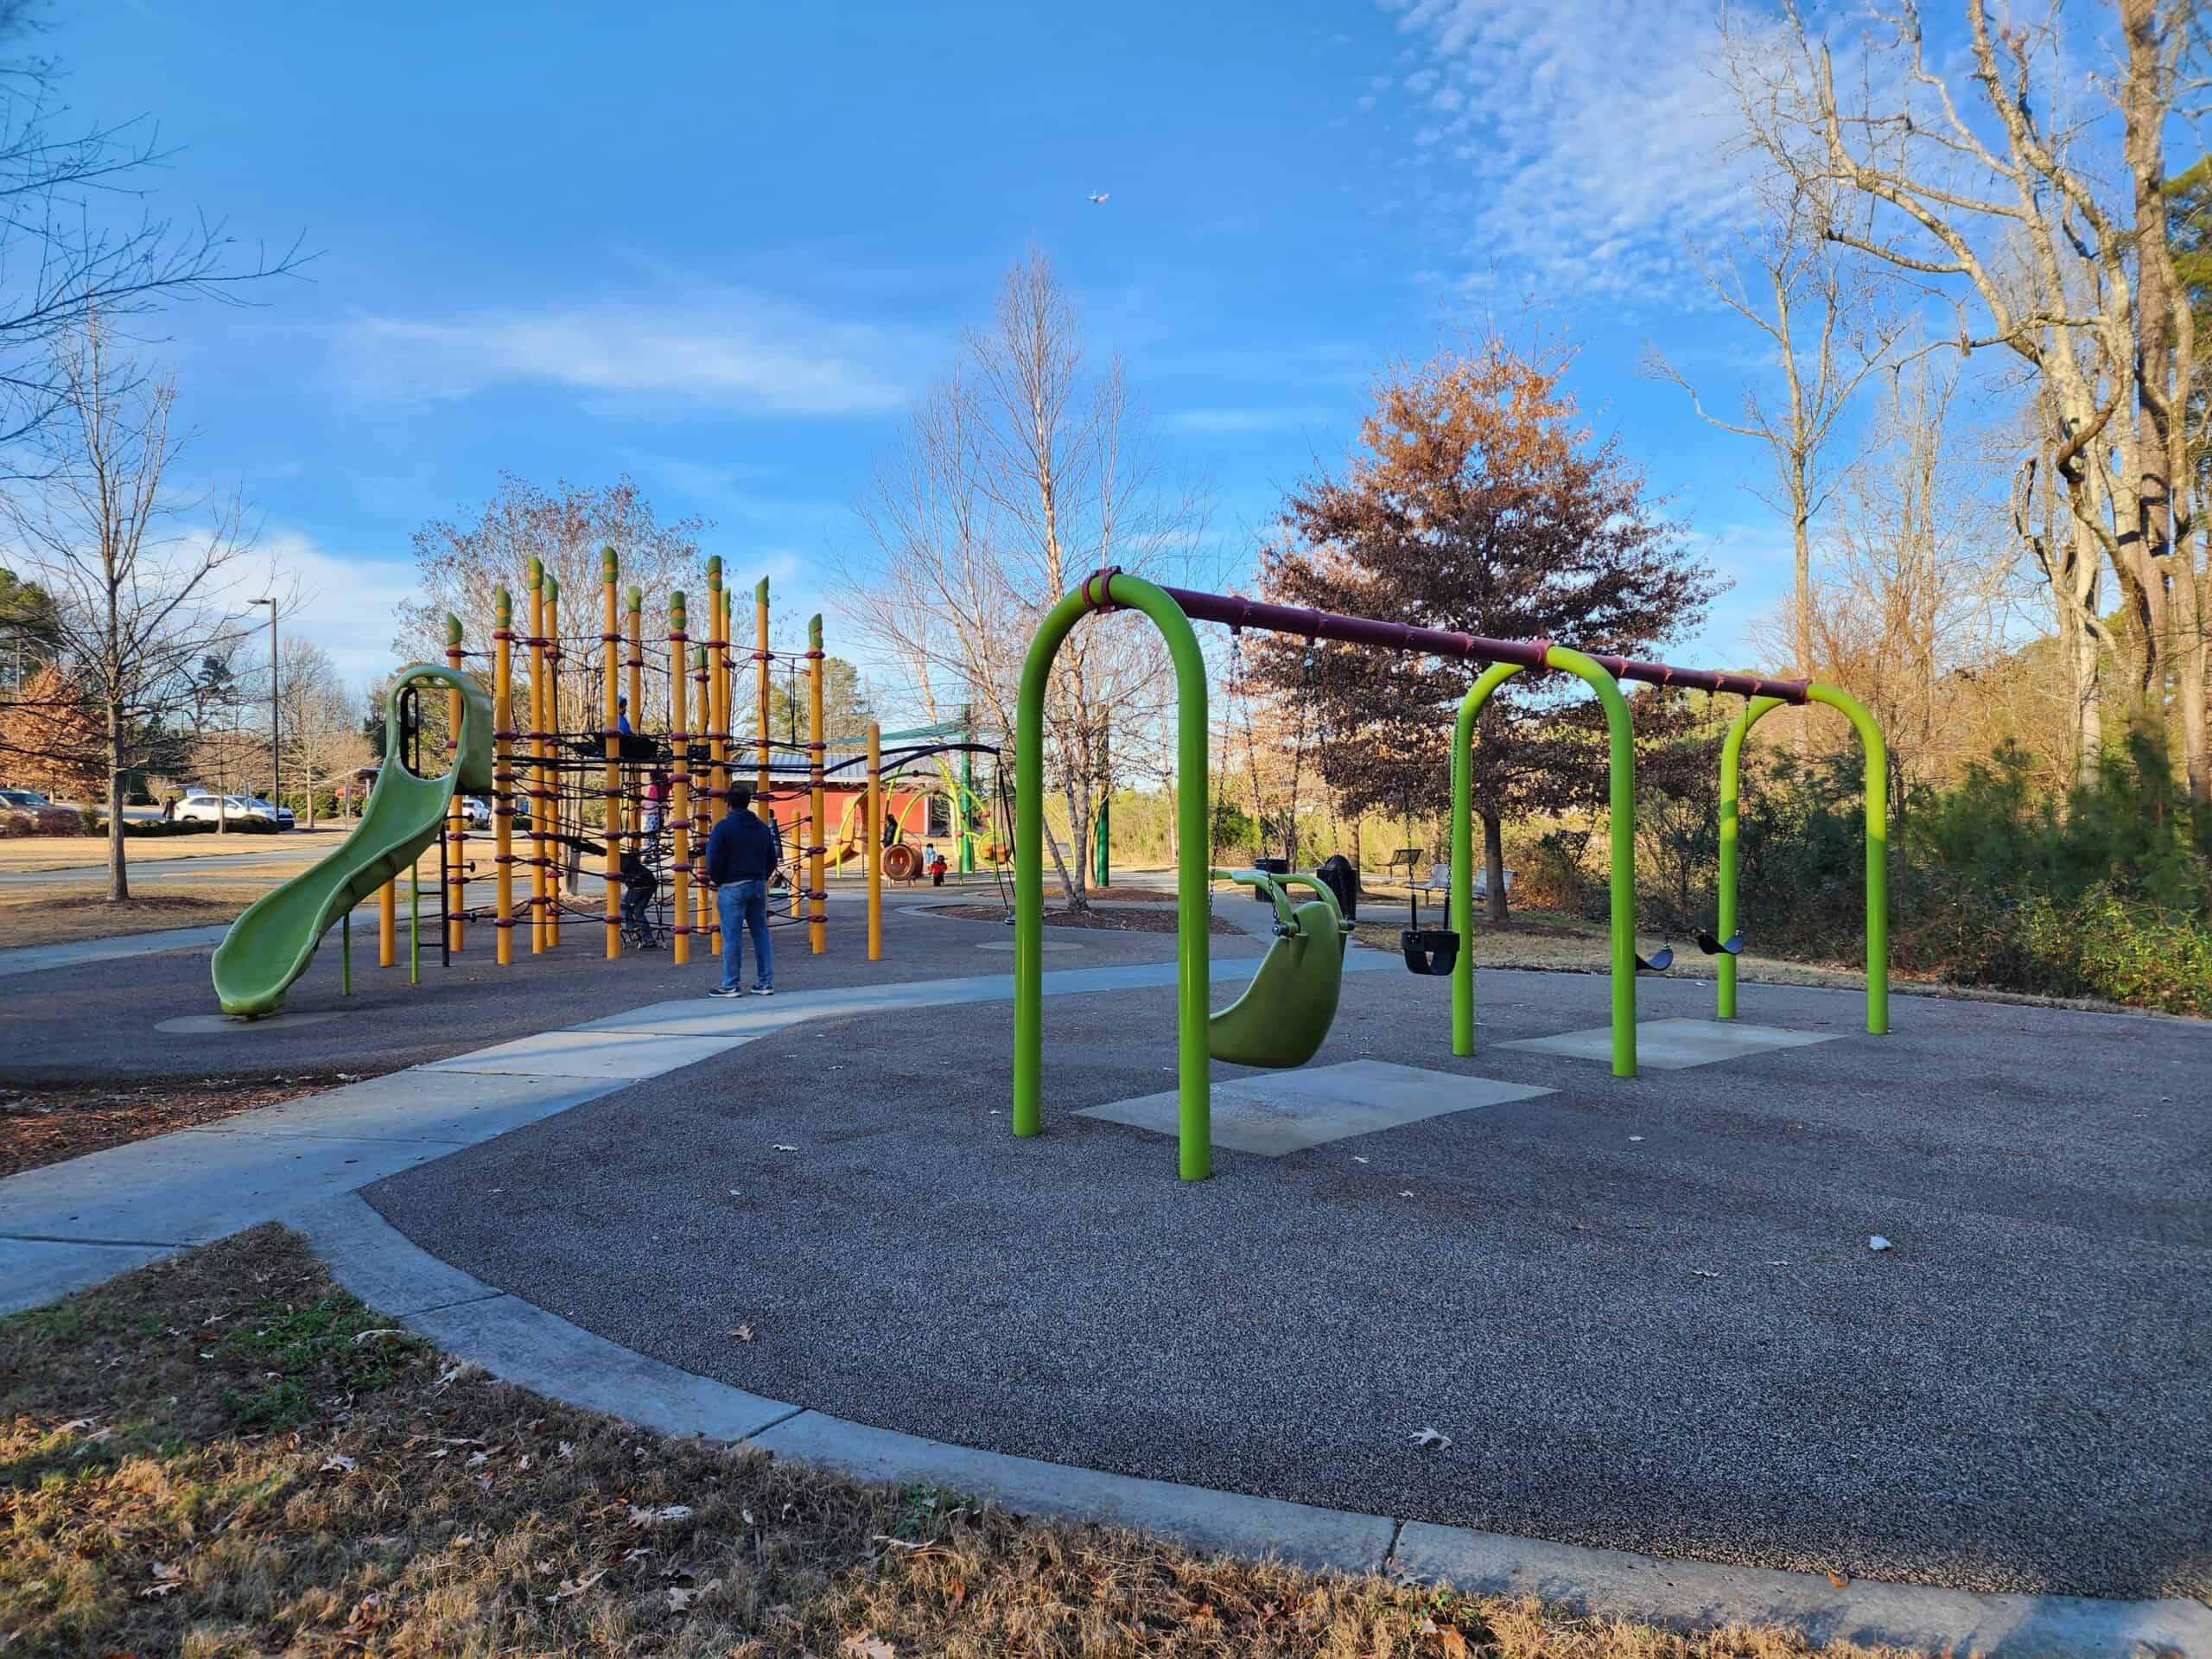 A vibrant playground at Carpenter Park in Cary, North Carolina, with colorful play structures including swings and a slide, set against a backdrop of bare winter trees under a clear blue sky, showcasing the park's recreational amenities for a playground review